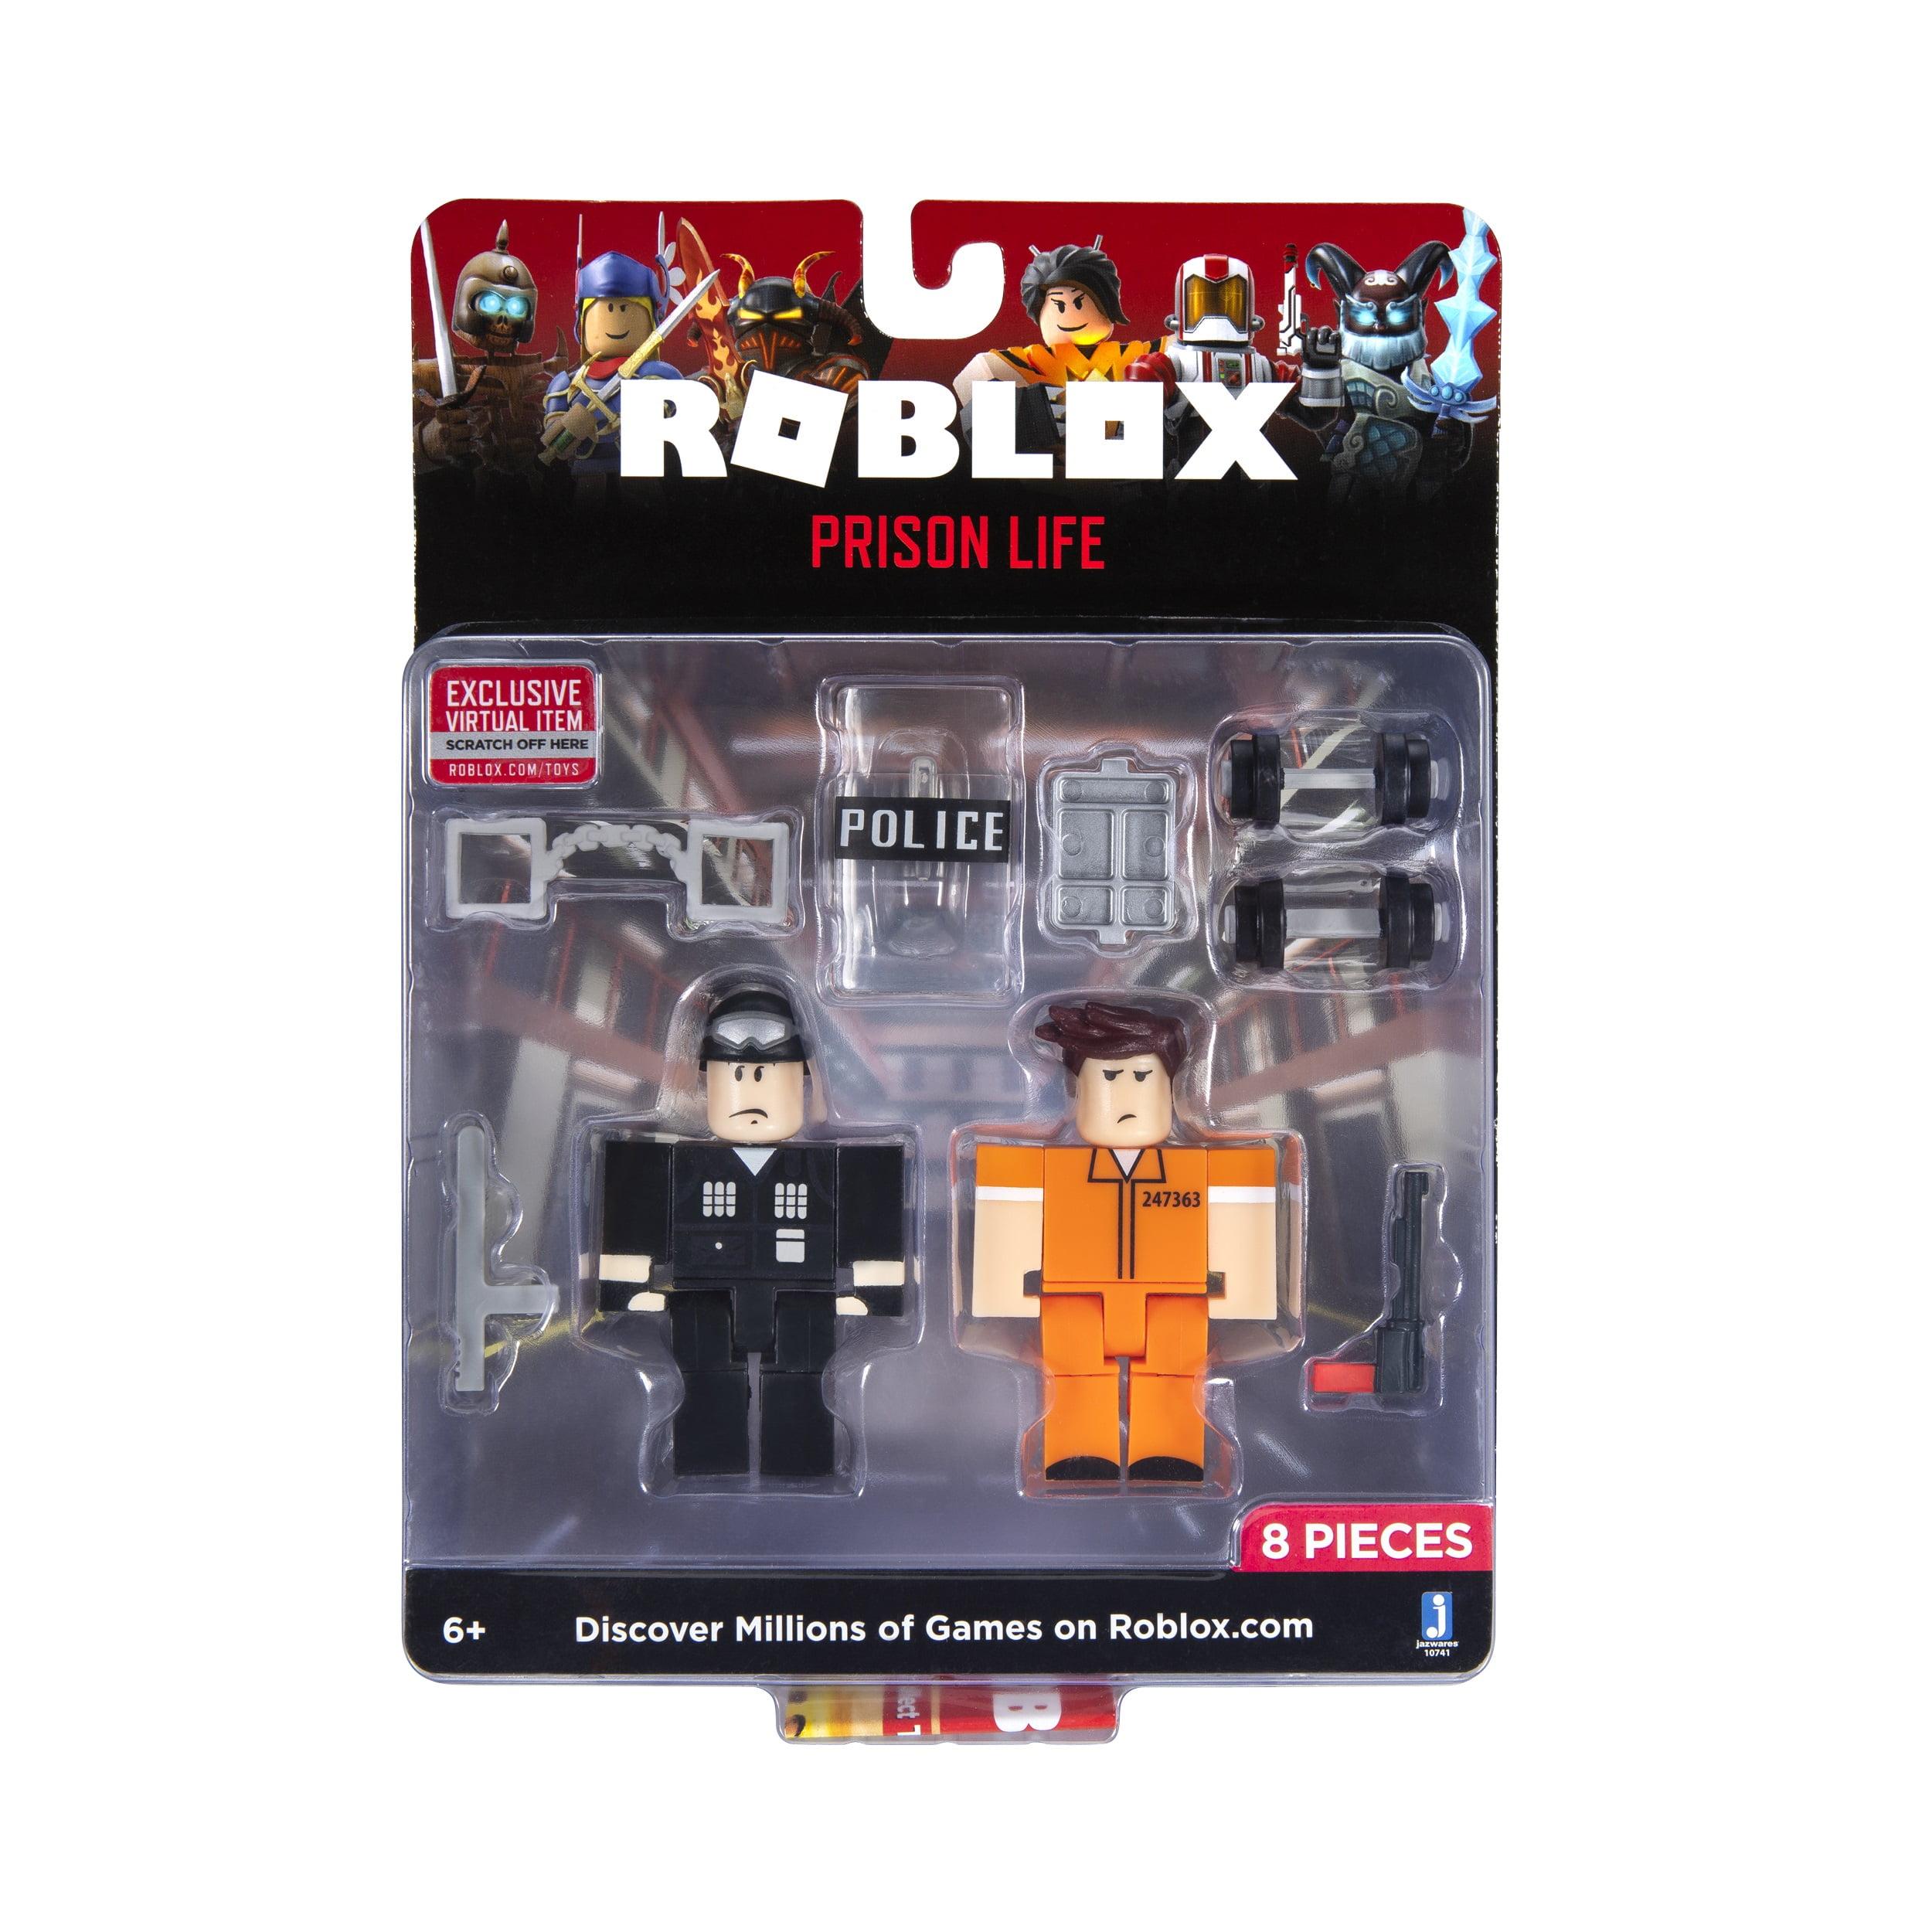 Roblox Action Collection Prison Life Game Pack Includes Exclusive Virtual Item Walmart Com Walmart Com - roblox jailbreak toy walmart